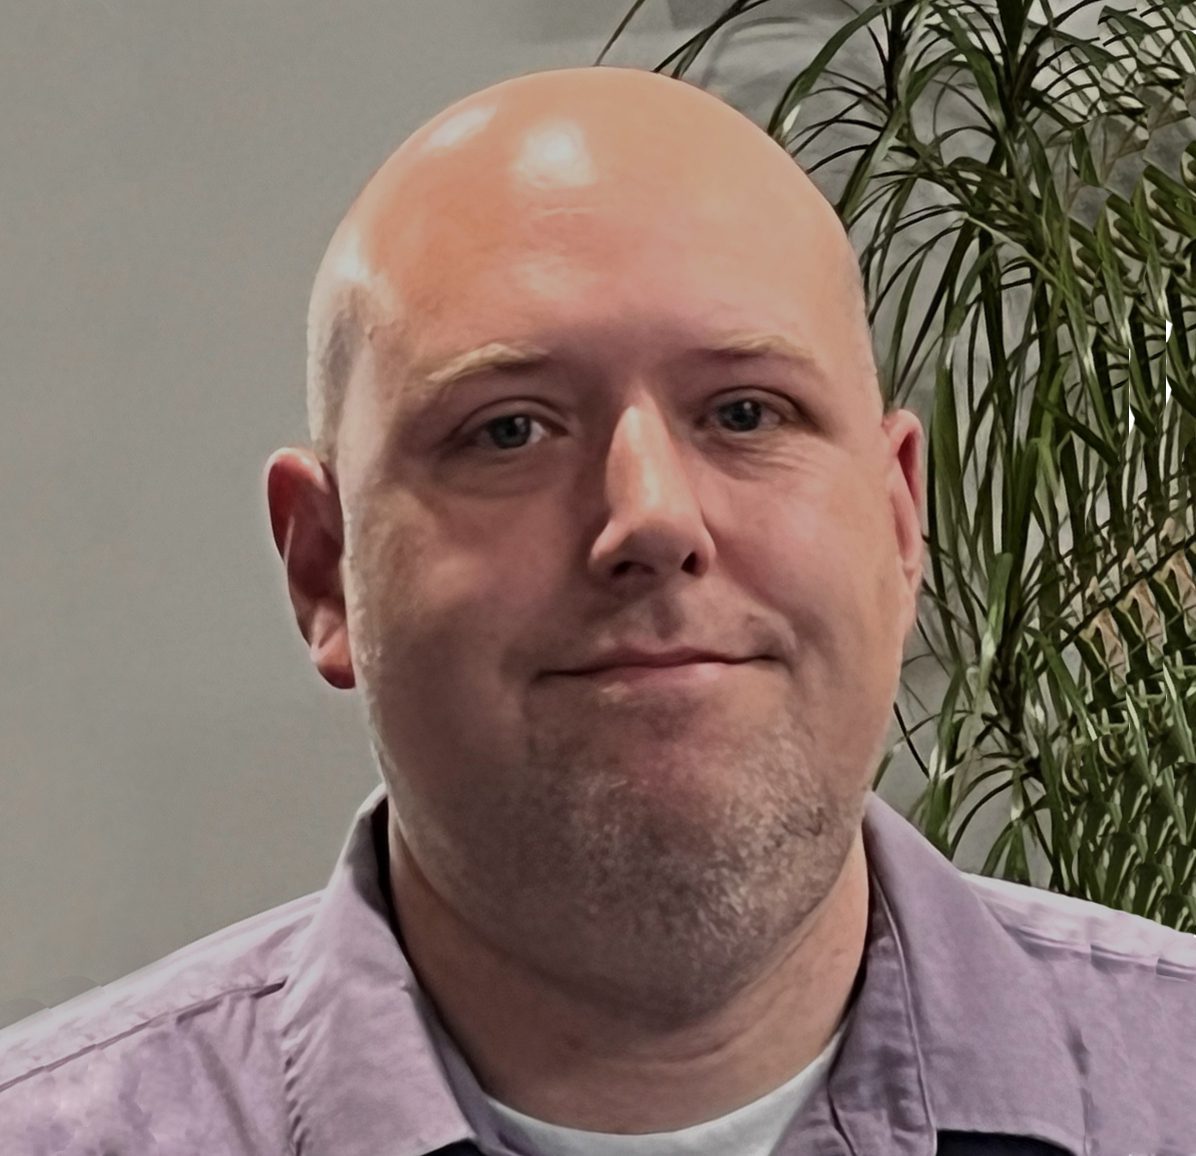 Bryan Baker - Manager and Quality Assurance at Wernle